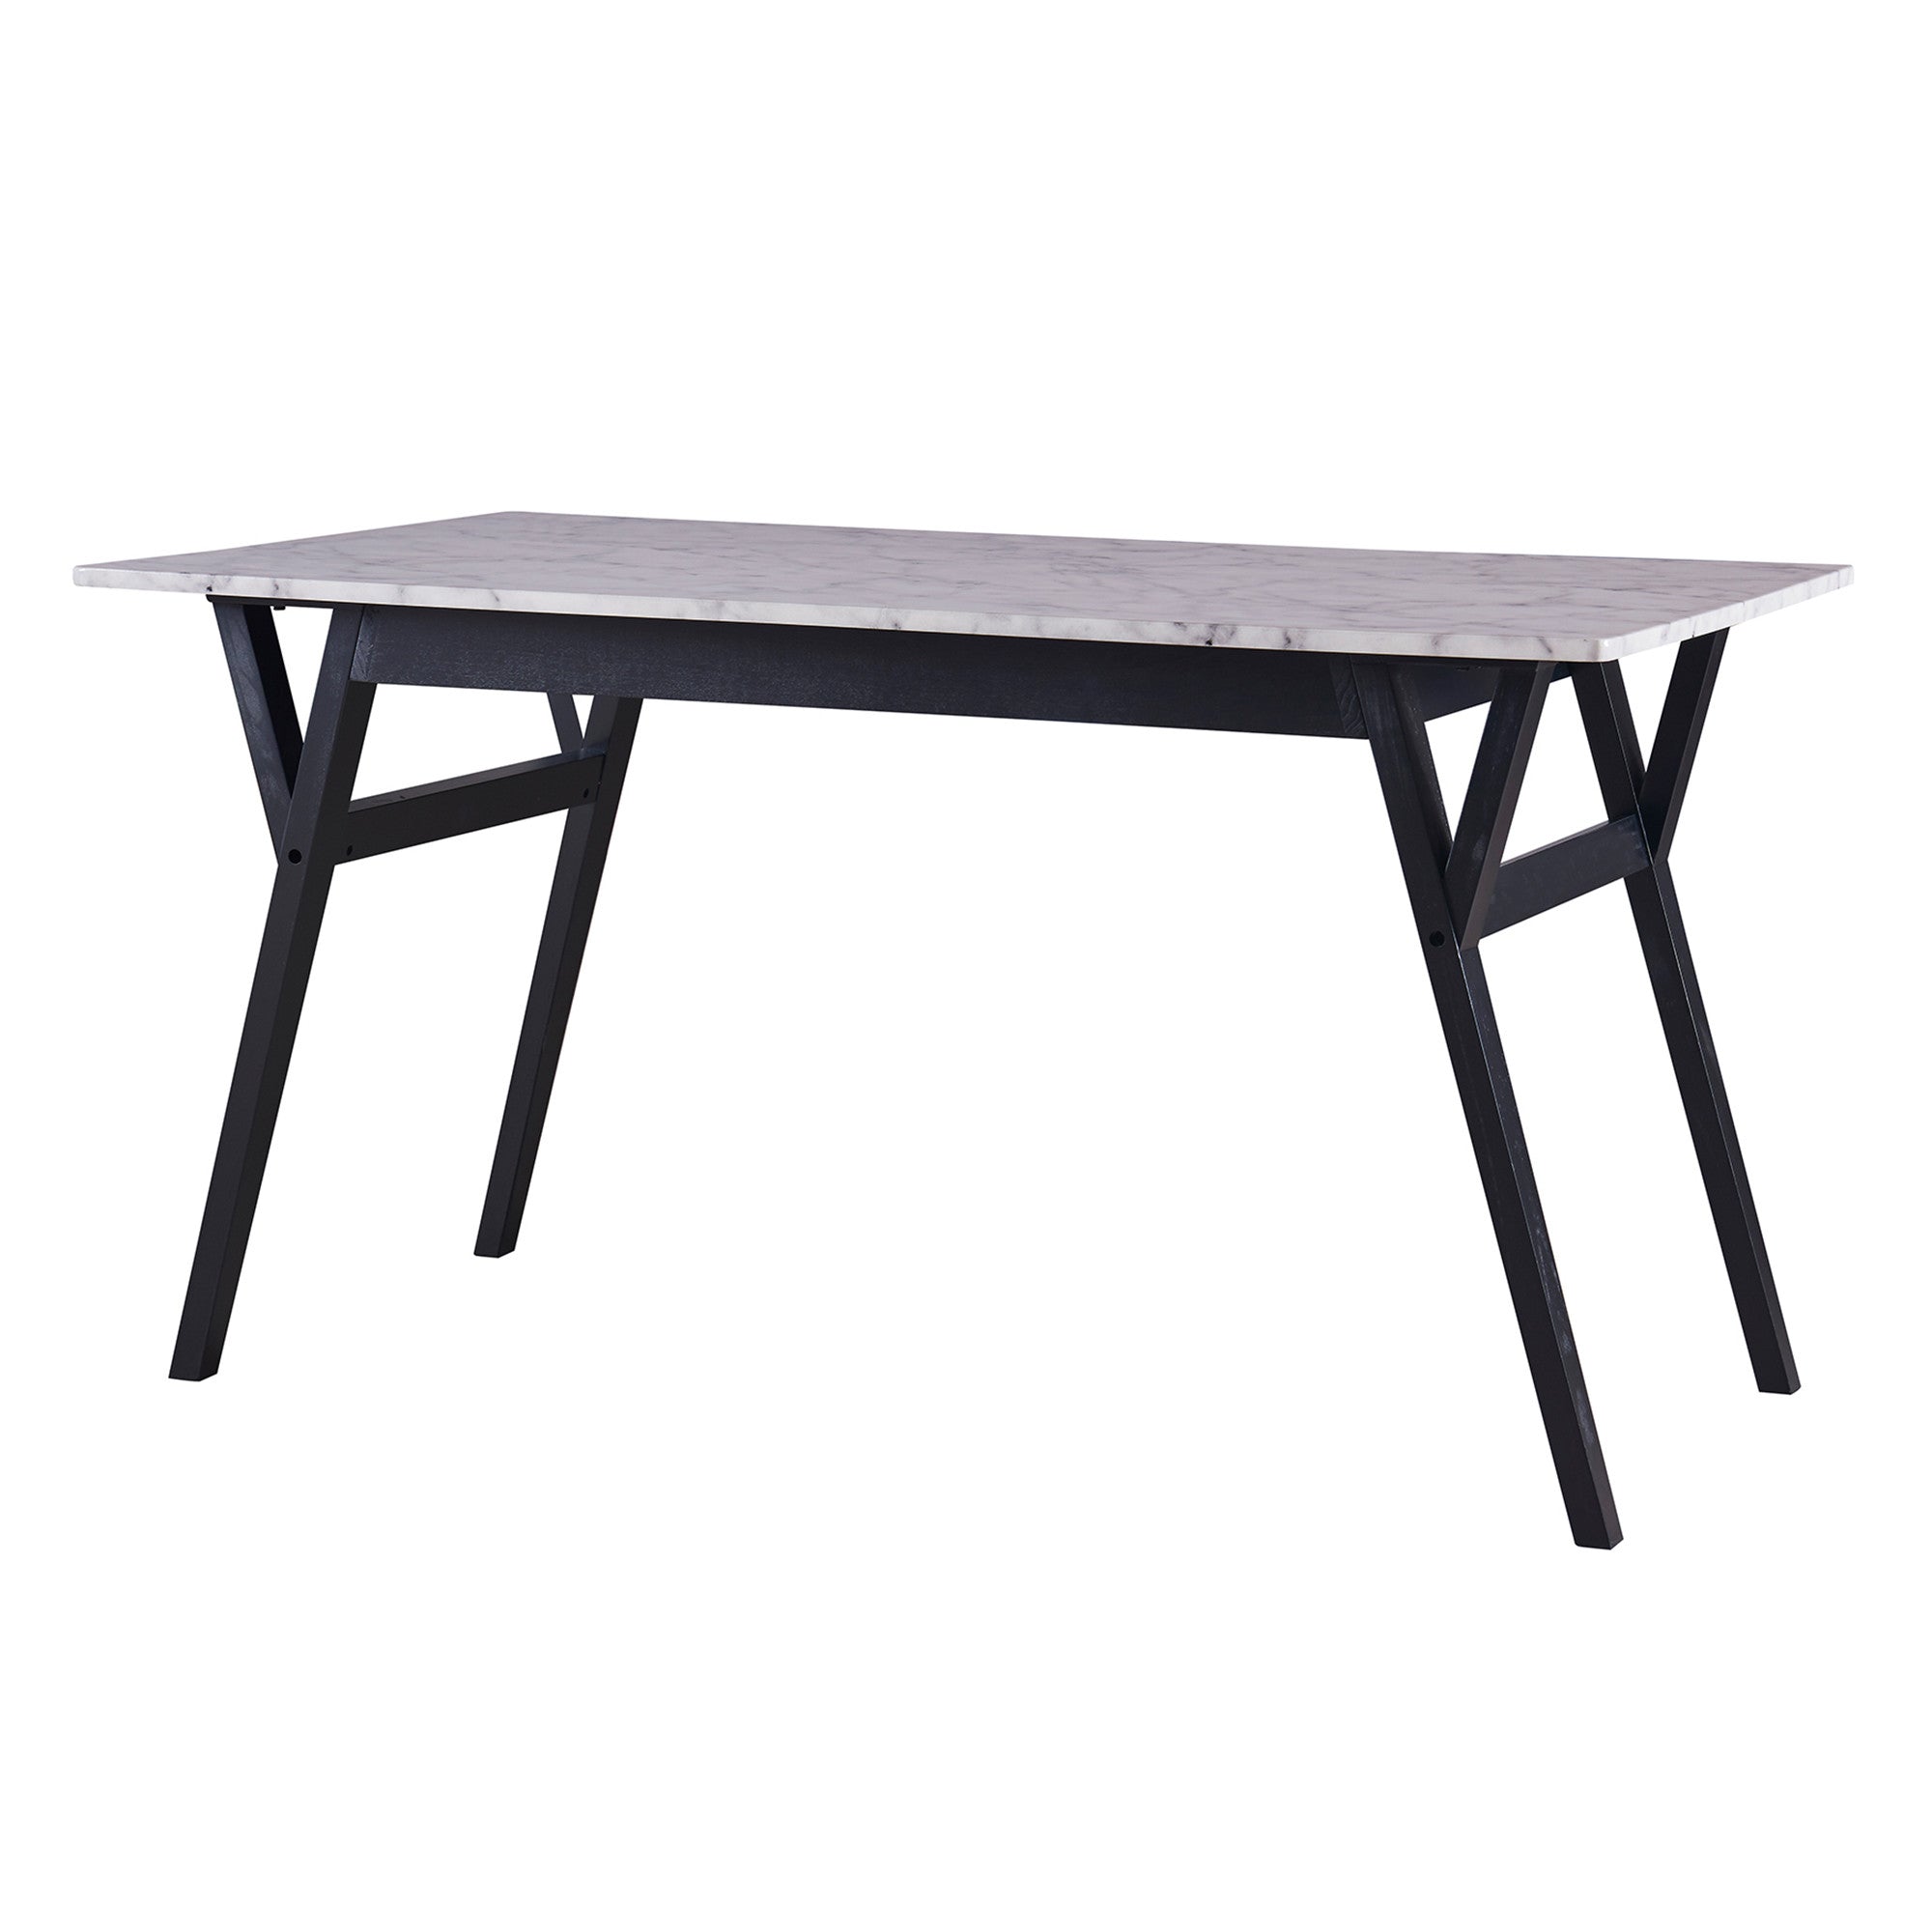 Teamson Home Ashton Rectangular Marble-Look Dining Table with Wood Base, Marble/Black